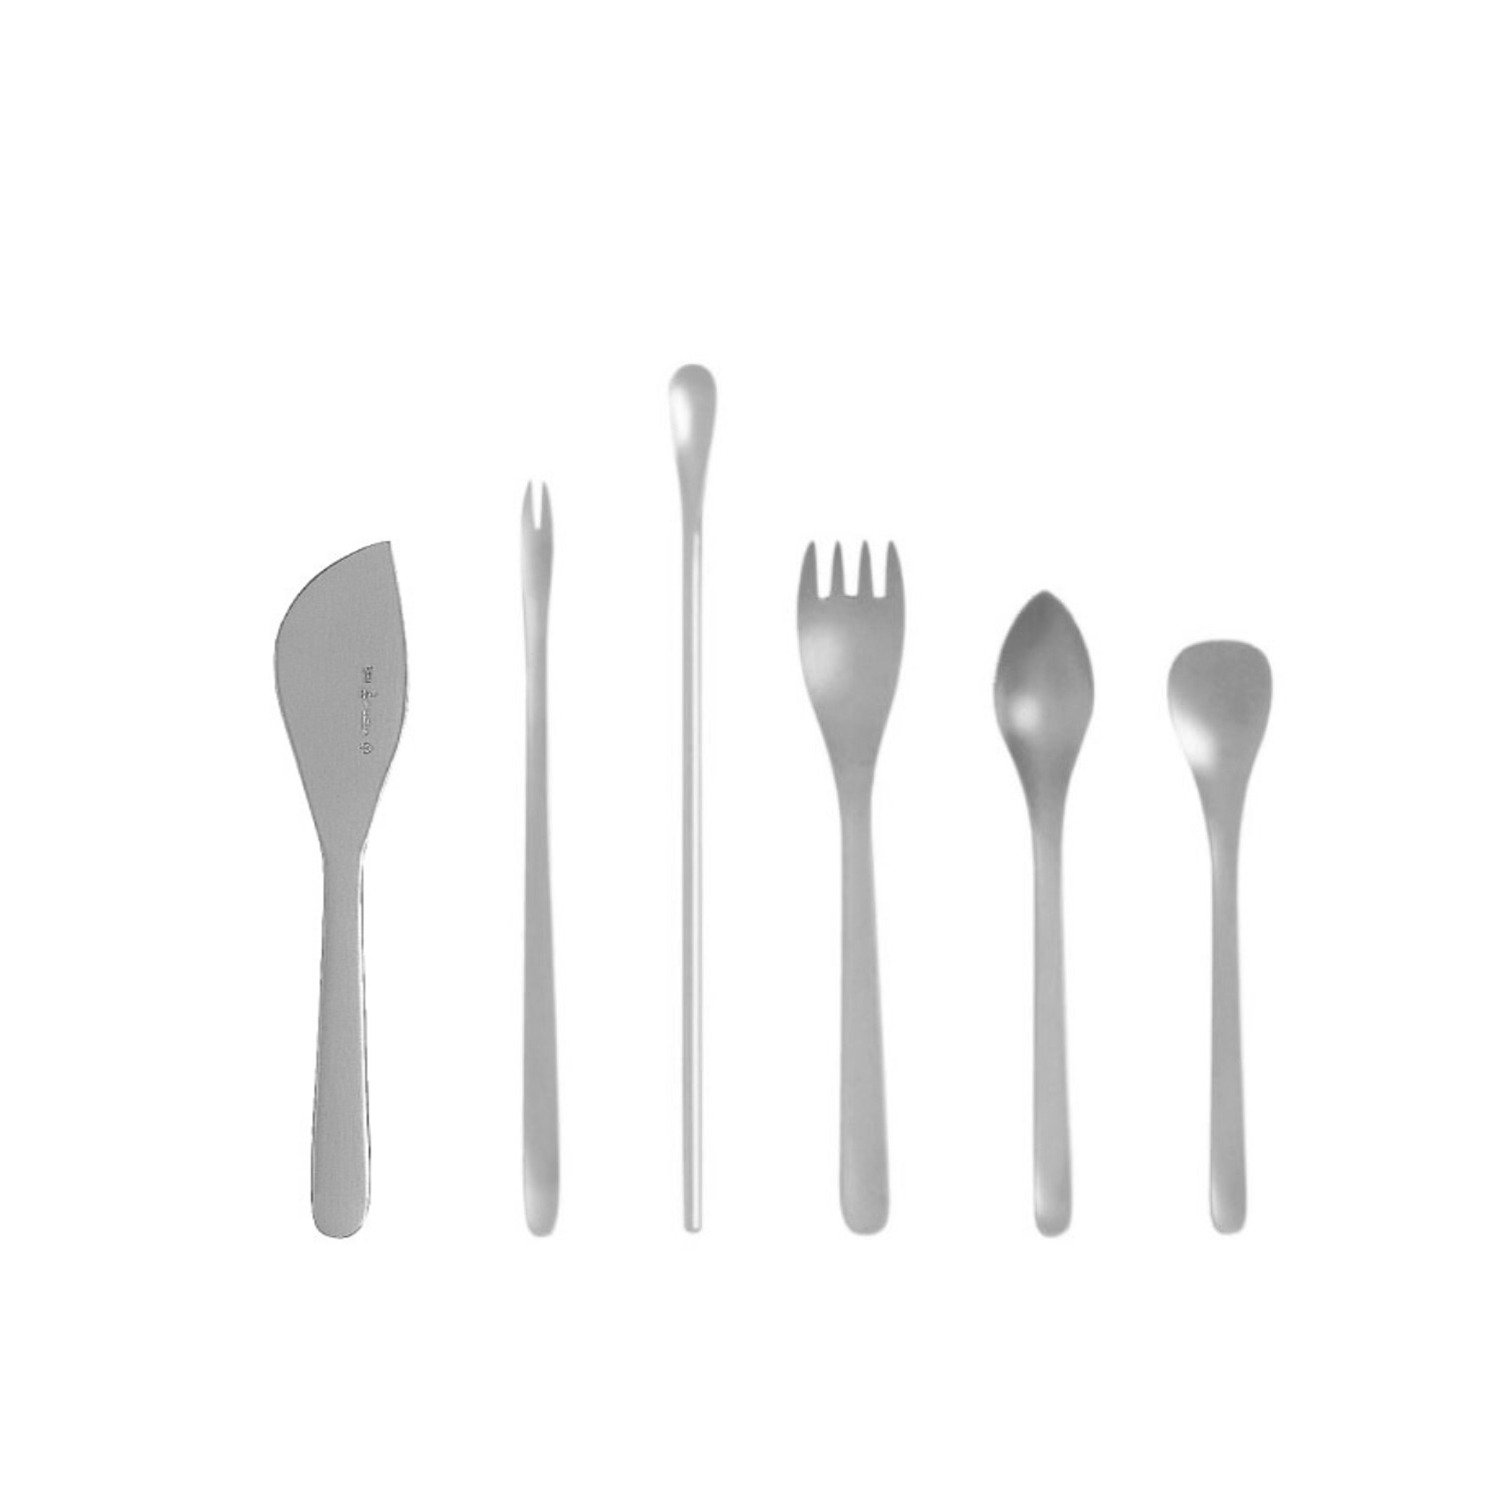 ﻿Stainless Steel Cutlery #1250 - Utensils for specific foods